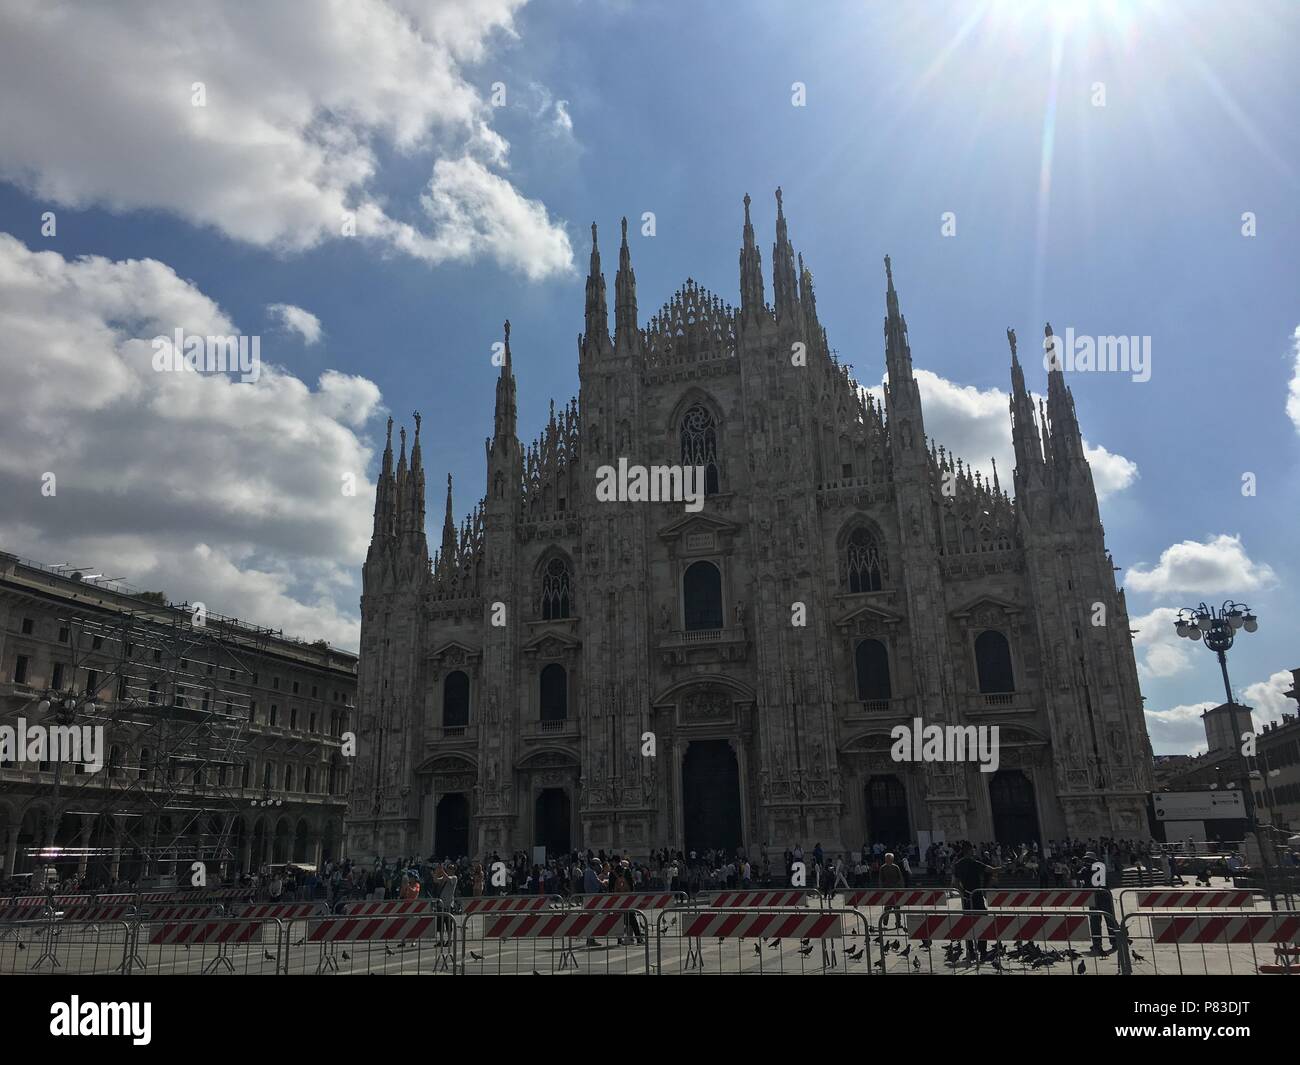 Milan, Milan, China. 9th July, 2018. Milan Cathedral is the cathedral church of Milan, Lombardy, Italy. Dedicated to St Mary of the Nativity (Santa Maria Nascente), it is the seat of the Archbishop of Milan, currently Archbishop Mario Delpini. The cathedral took nearly six centuries to complete. It is the largest church in Italy (the larger St. Peter's Basilica is in the State of Vatican City) and the third largest in the world. Credit: SIPA Asia/ZUMA Wire/Alamy Live News Stock Photo